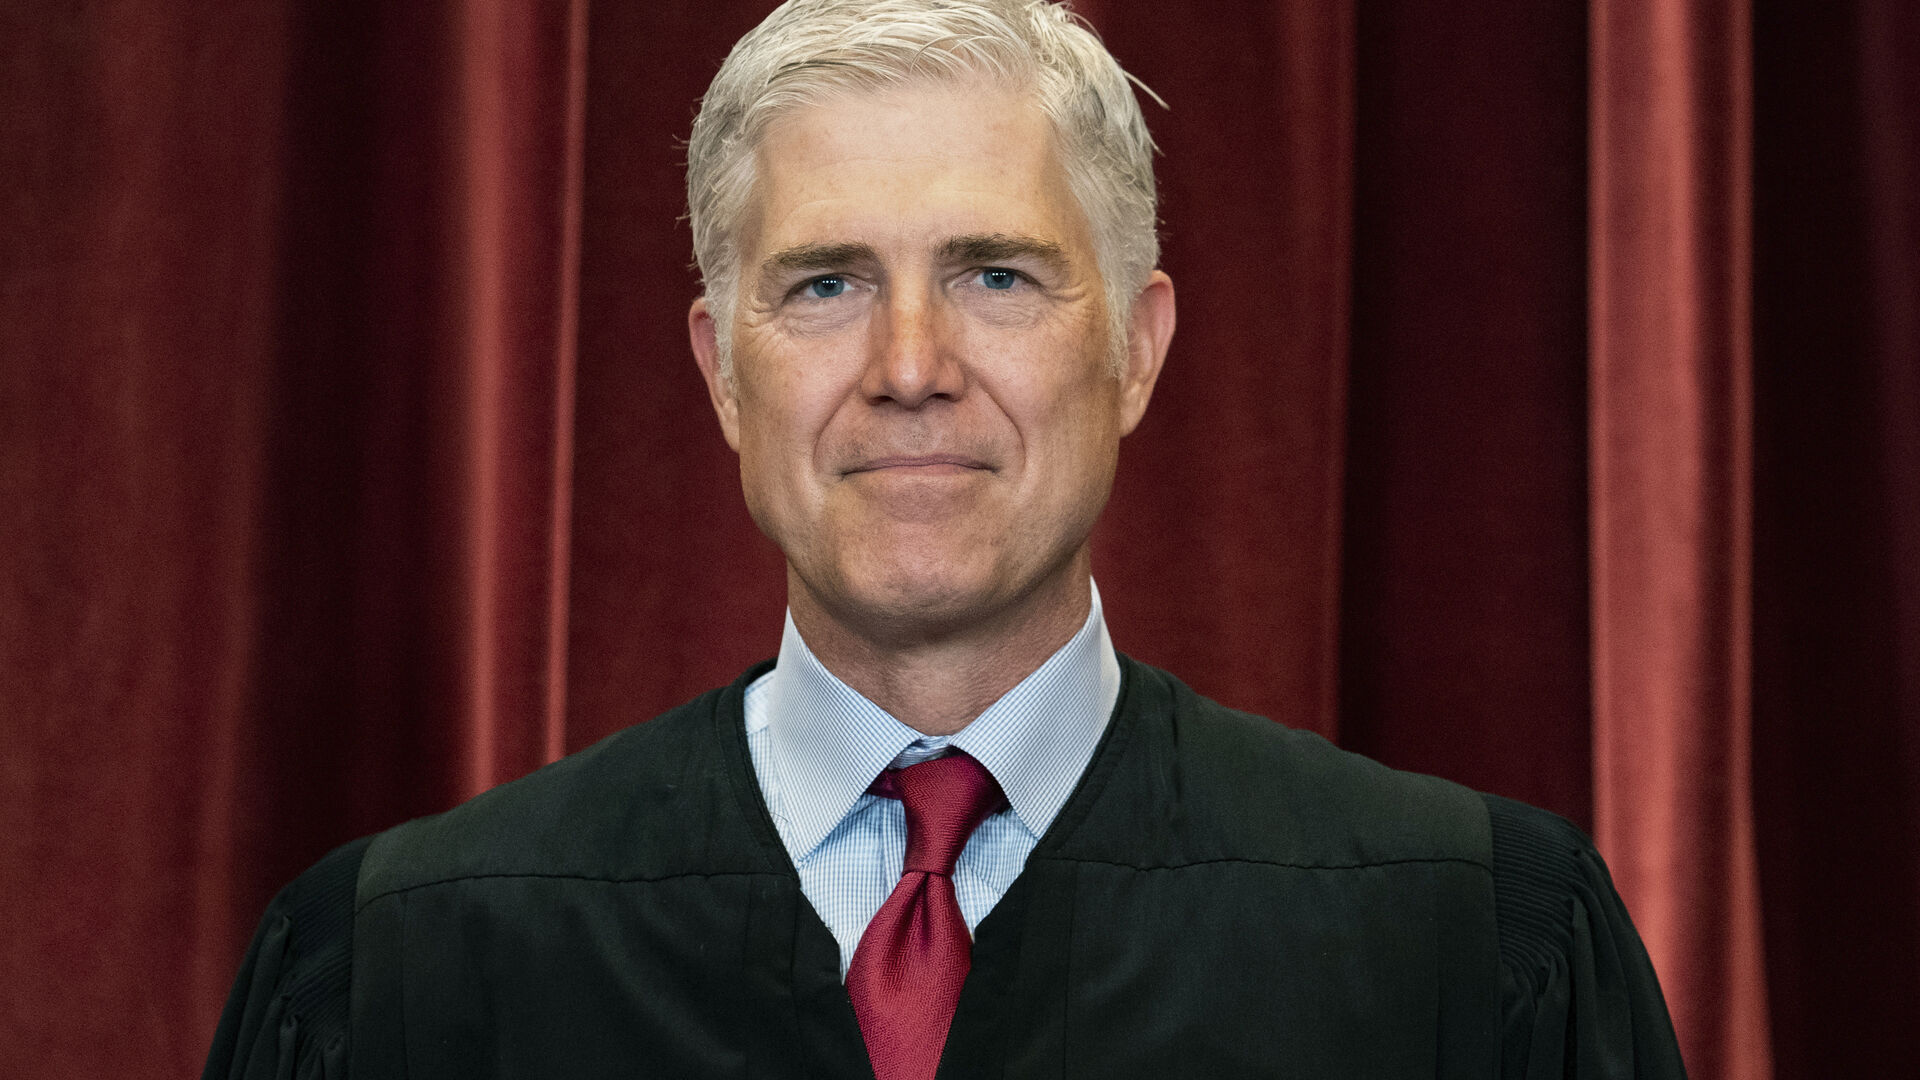 Supreme Court Justice Neil Gorsuch has raised concerns about the abuse of power by the federal government amid the COVID-19 pandemic.